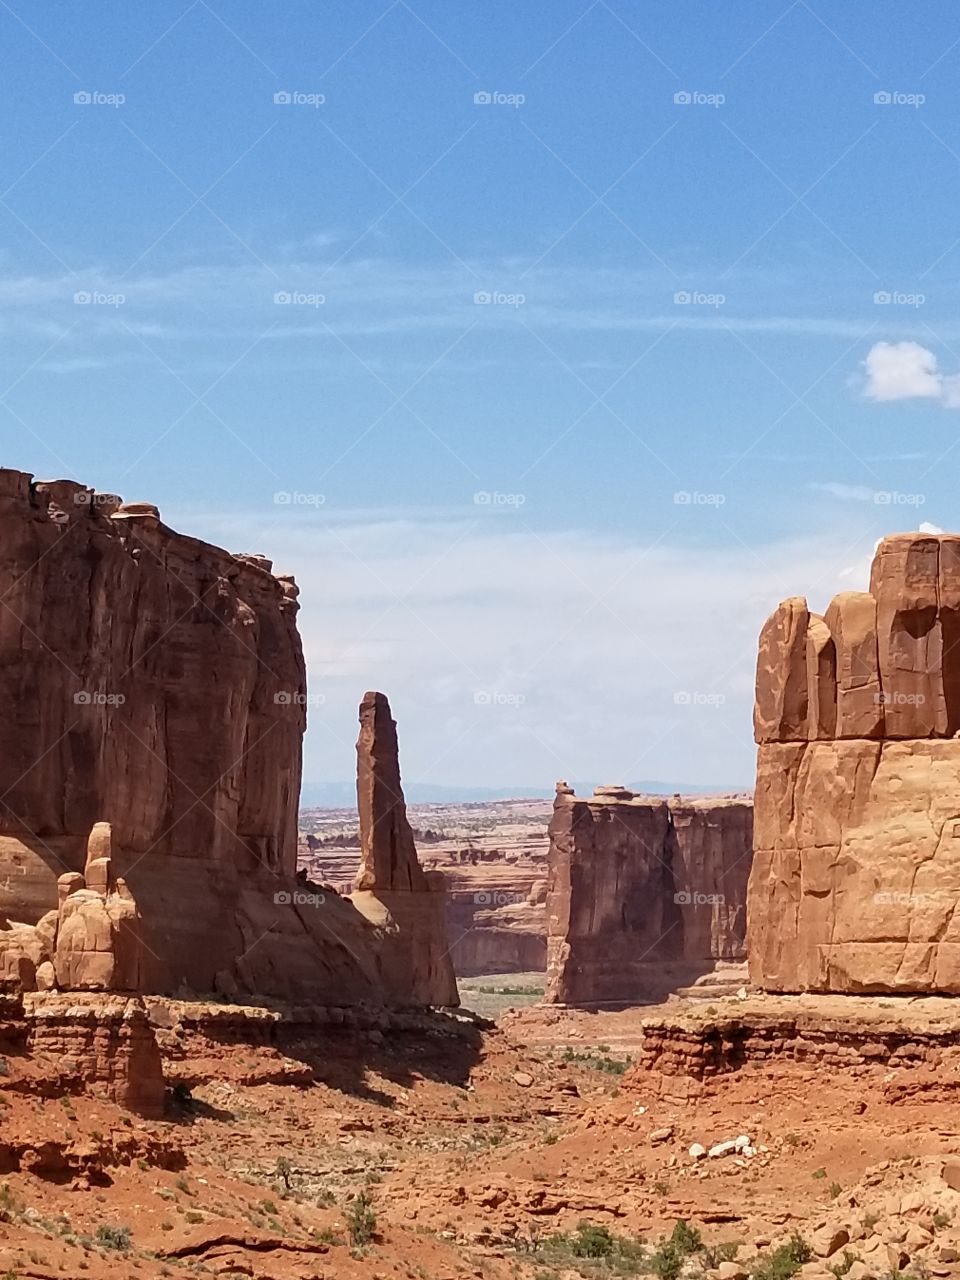 A beautiful view at arches national park!